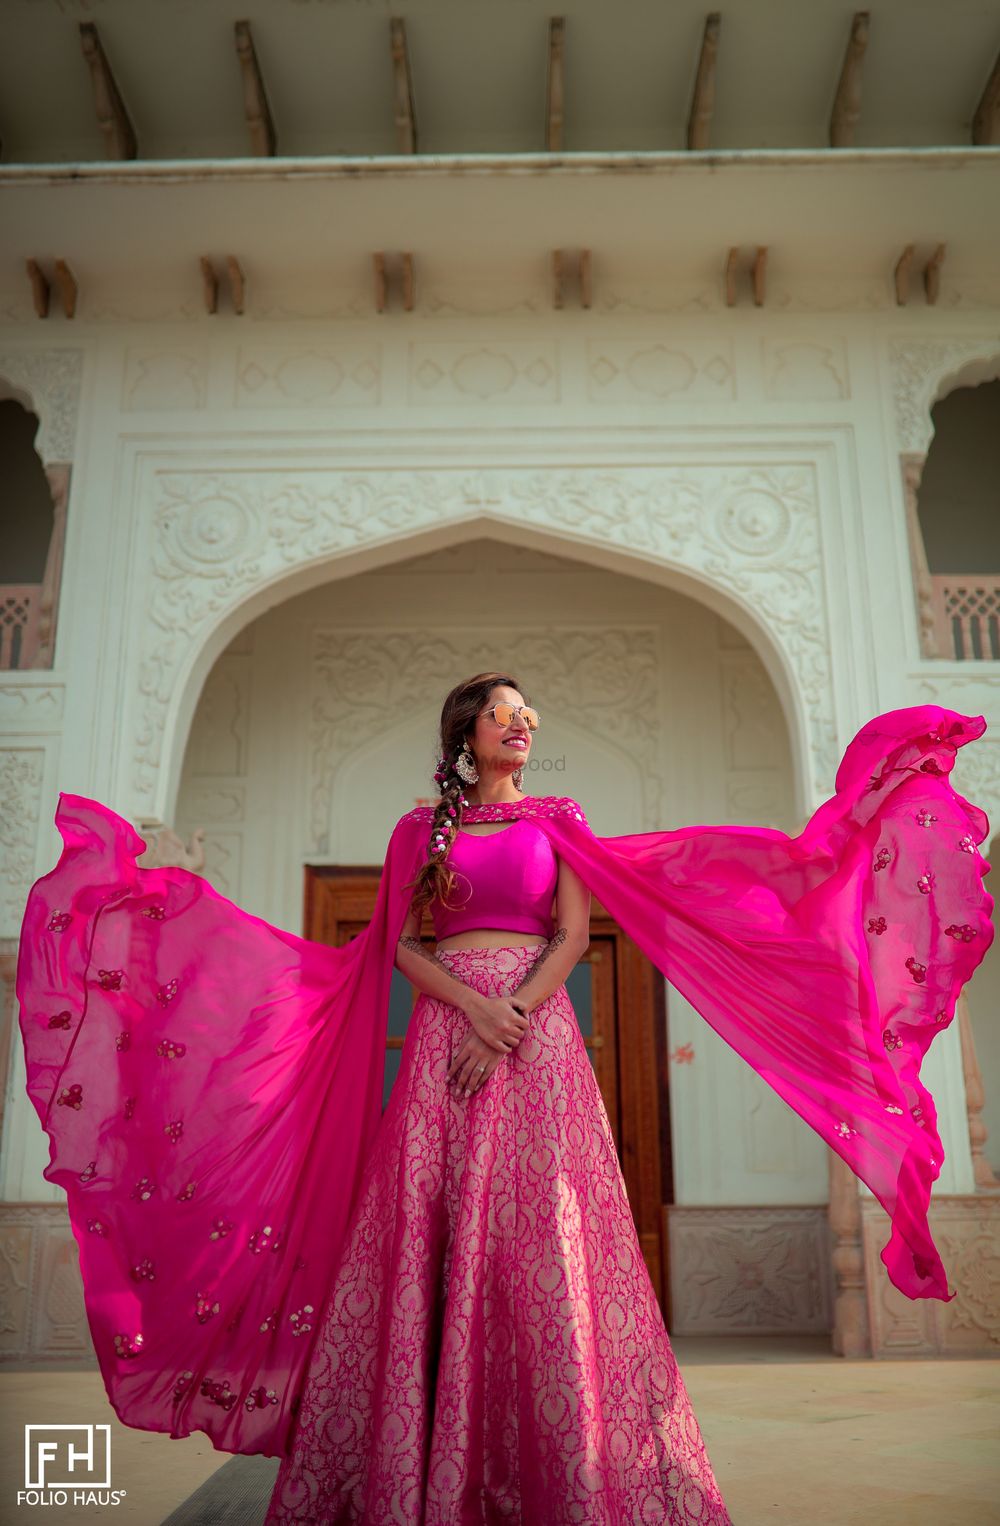 Photo of The bride dressed in a banarasi lehenga with a cape-sleeved blouse.